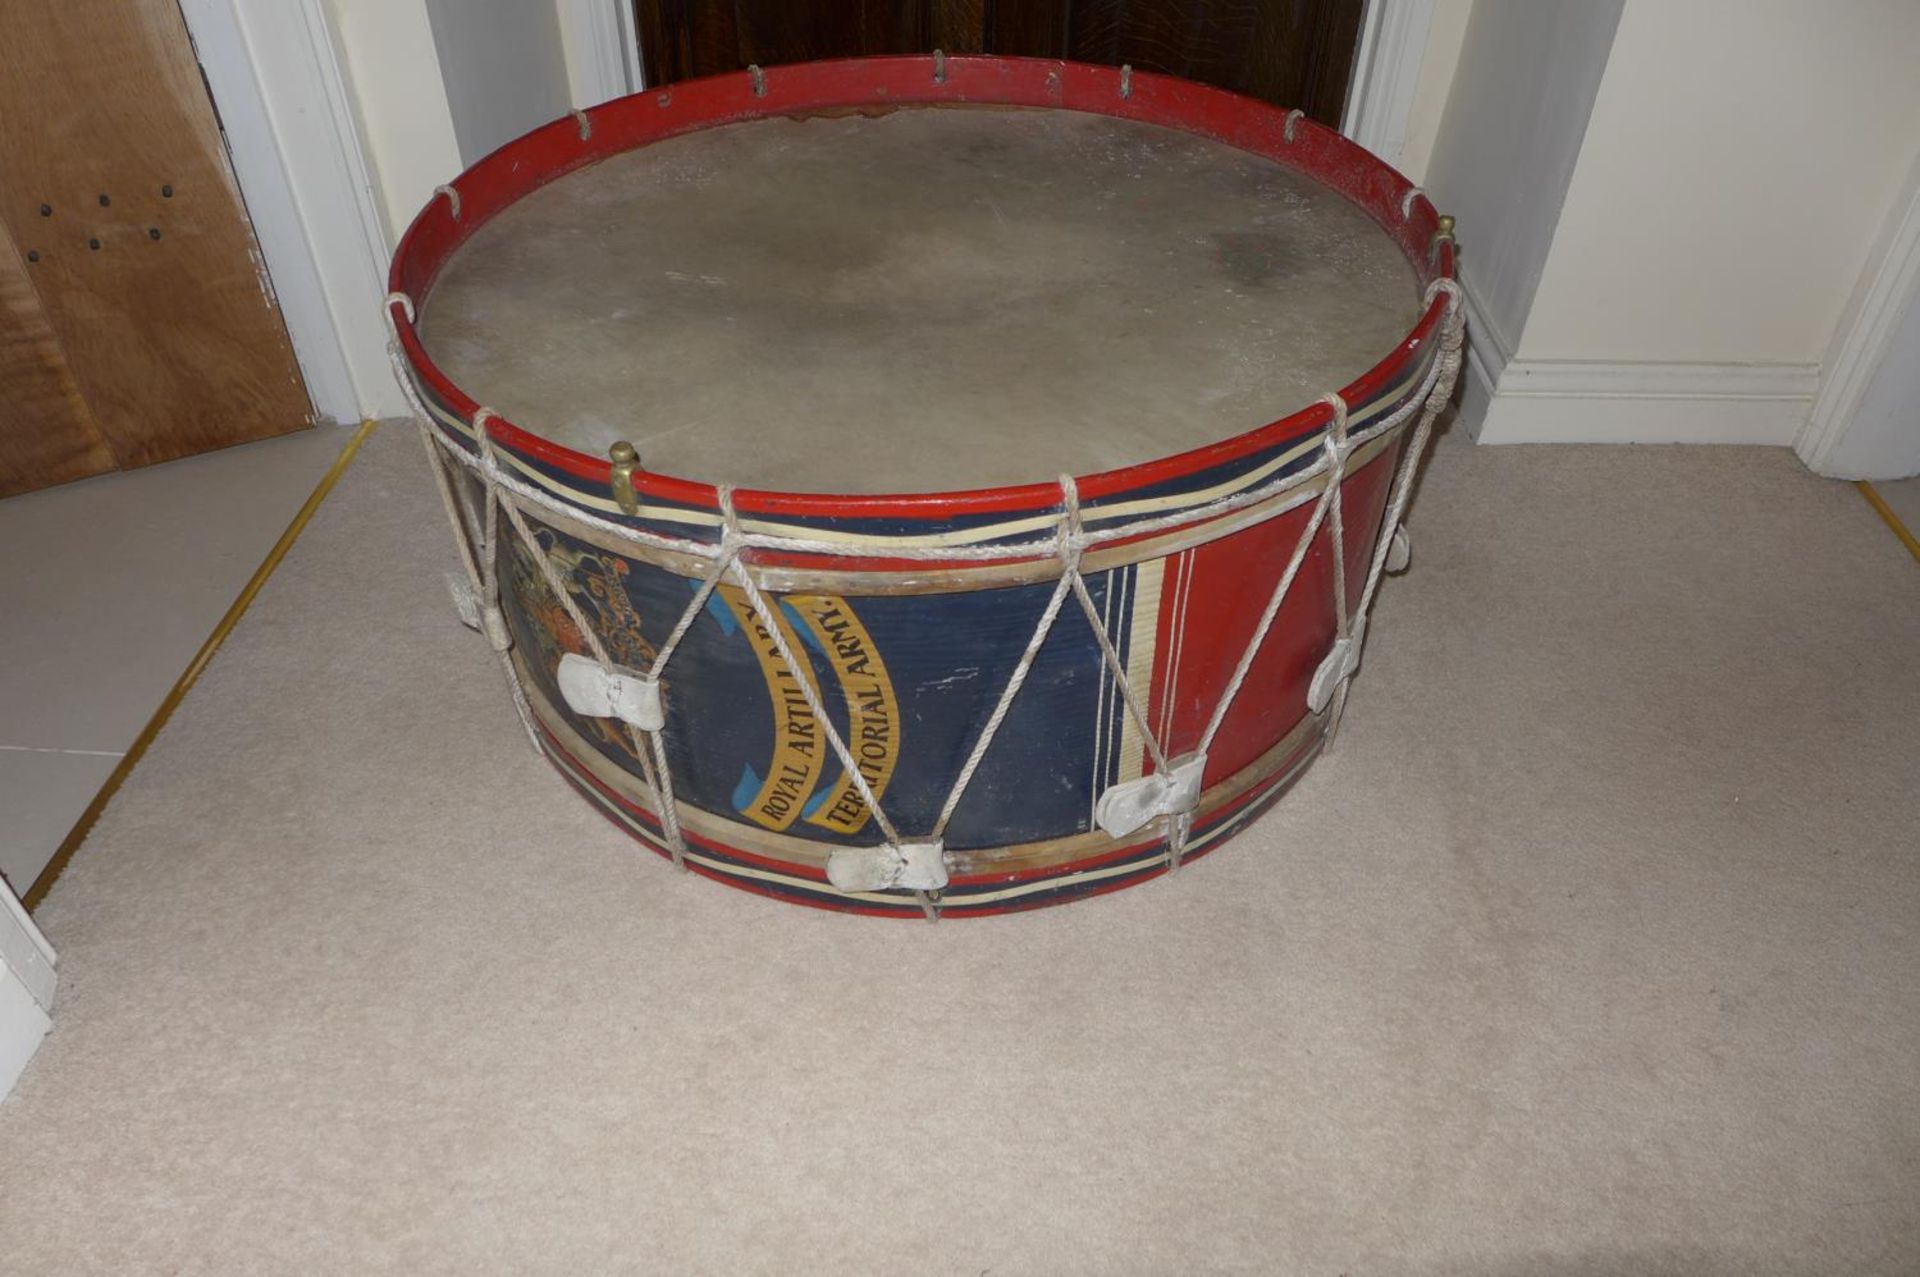 A LARGE EARLY 20TH CENTURY ROYAL ARTILLARY REGIMENTAL BASS DRUM, 82 CM DIAMETER, WITH ROYAL COAT